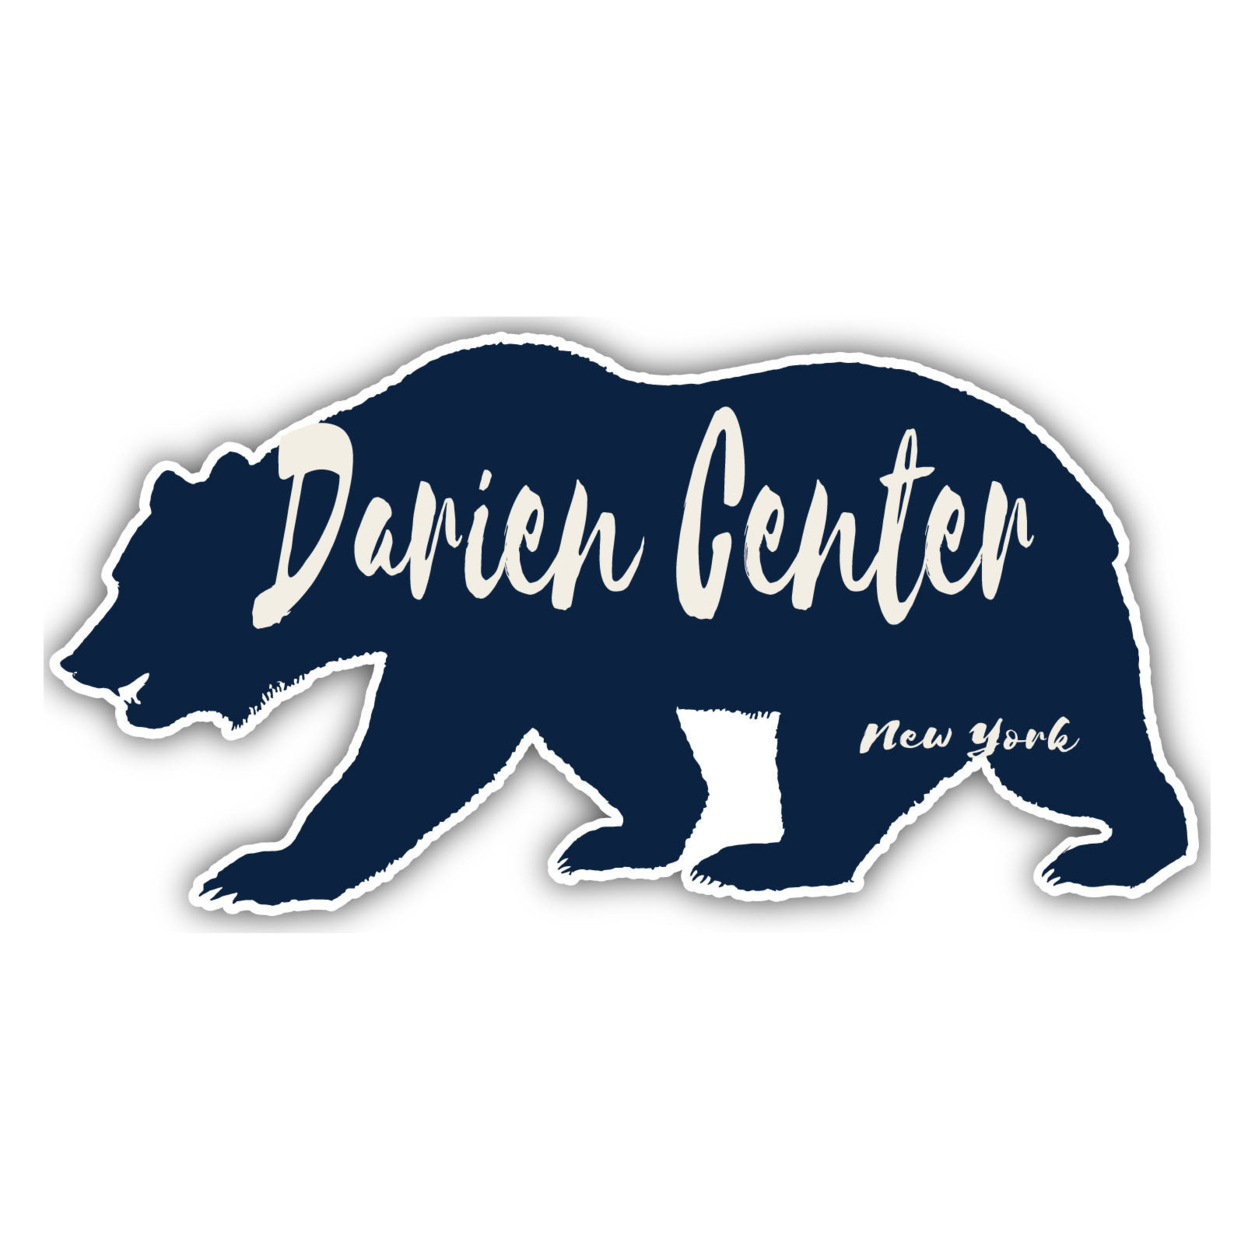 Darien Center New York Souvenir Decorative Stickers (Choose Theme And Size) - 4-Pack, 8-Inch, Bear